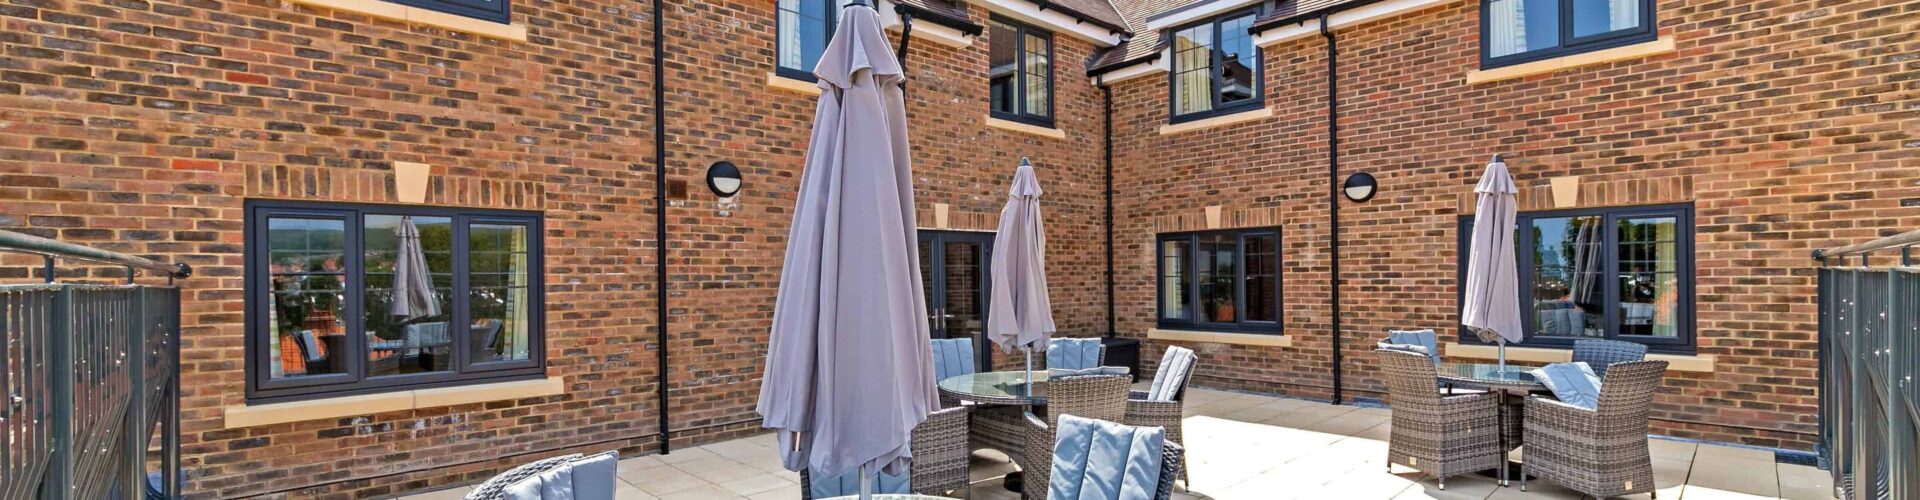 Outside terrace area with table, seats and parasol at Oakland Care Home in Eastbourne